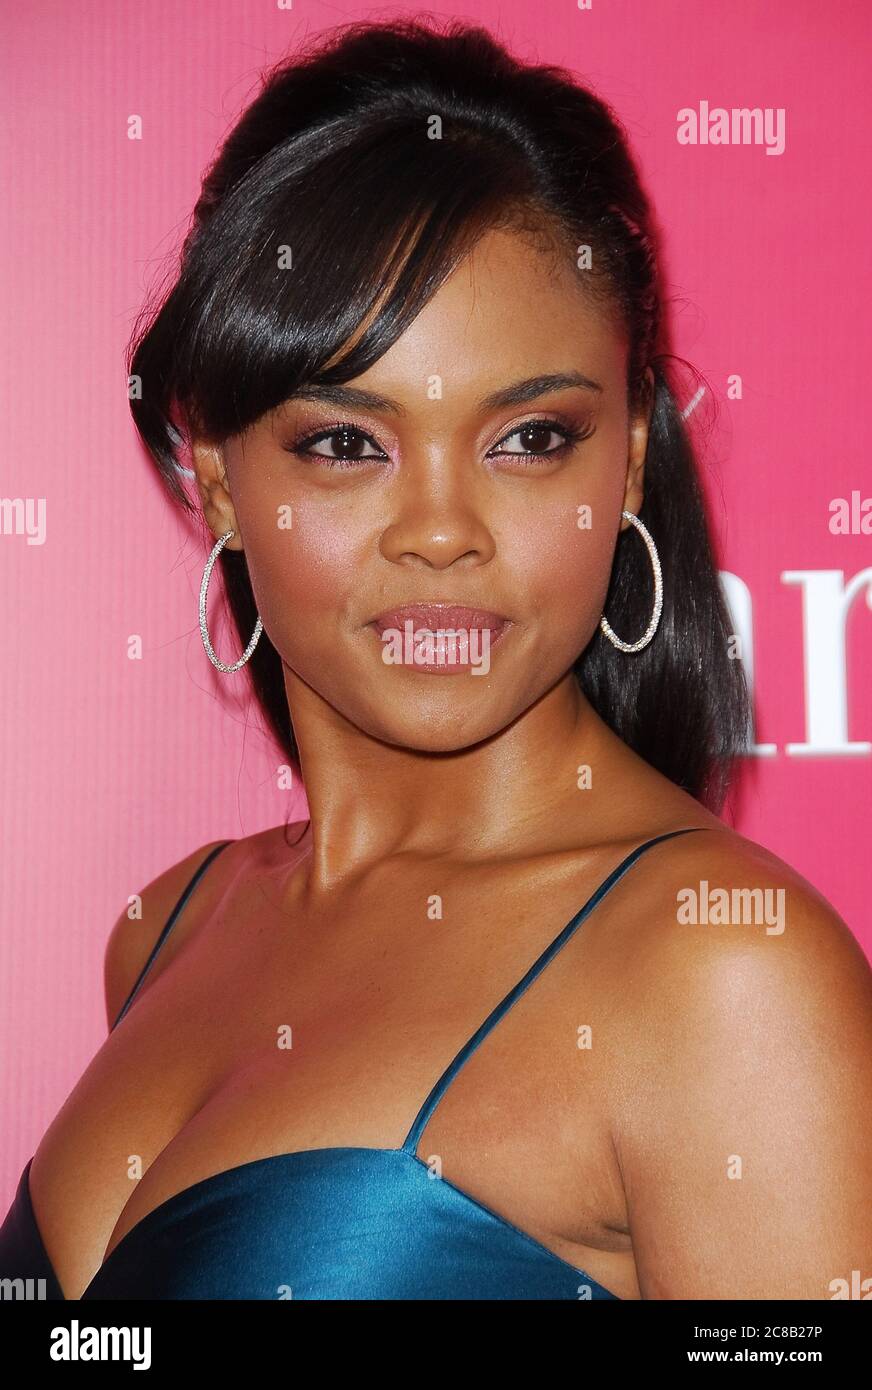 Sharon Leal at the World Premiere of 'This Christmas' held at the Cinerama Dome in Hollywood, CA. The event took place on Monday, November 12, 2007. Photo by: SBM / PictureLux - File Reference # 34006-10328SBMPLX Stock Photo